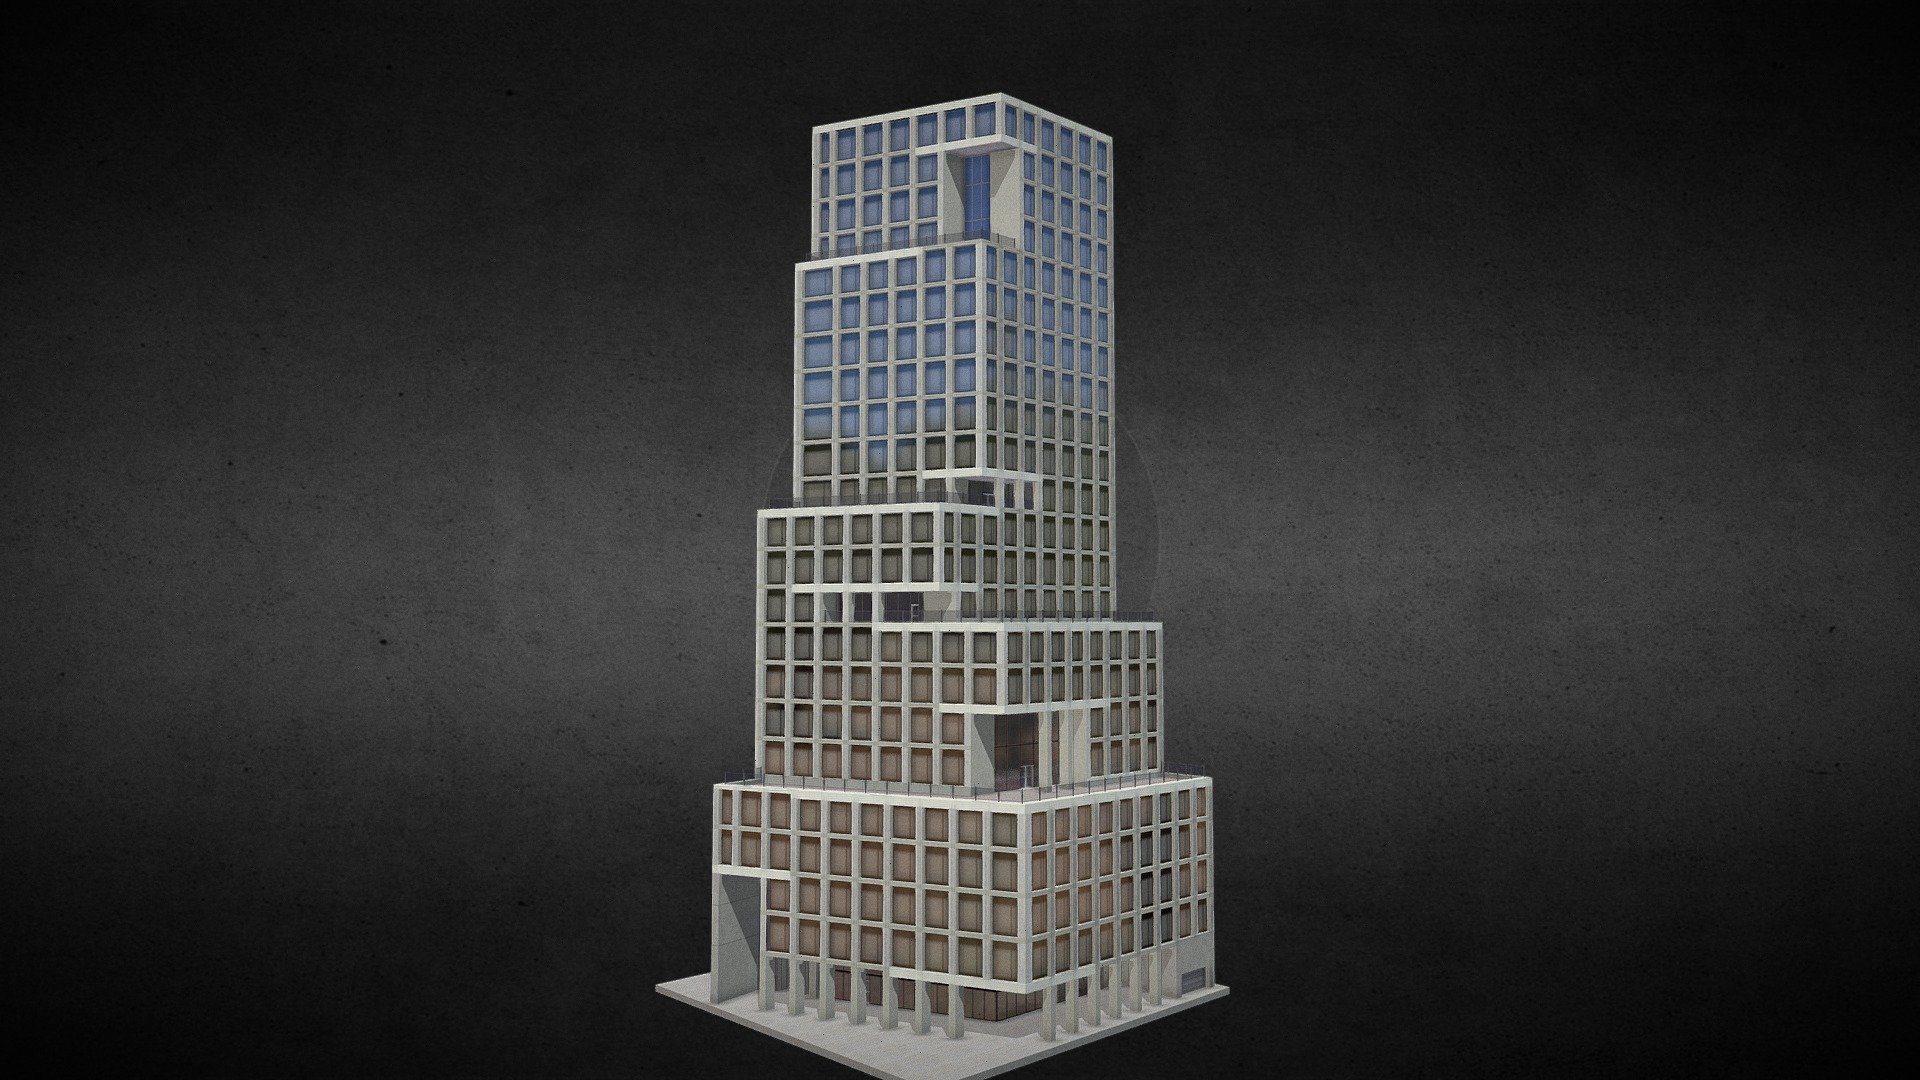 1245 Broadway - New York

Created to be integrated en the game CitiesSkylines - Colossalorder

NoAI

This building was modelled from open source floor plans and reference images from Google 3d model